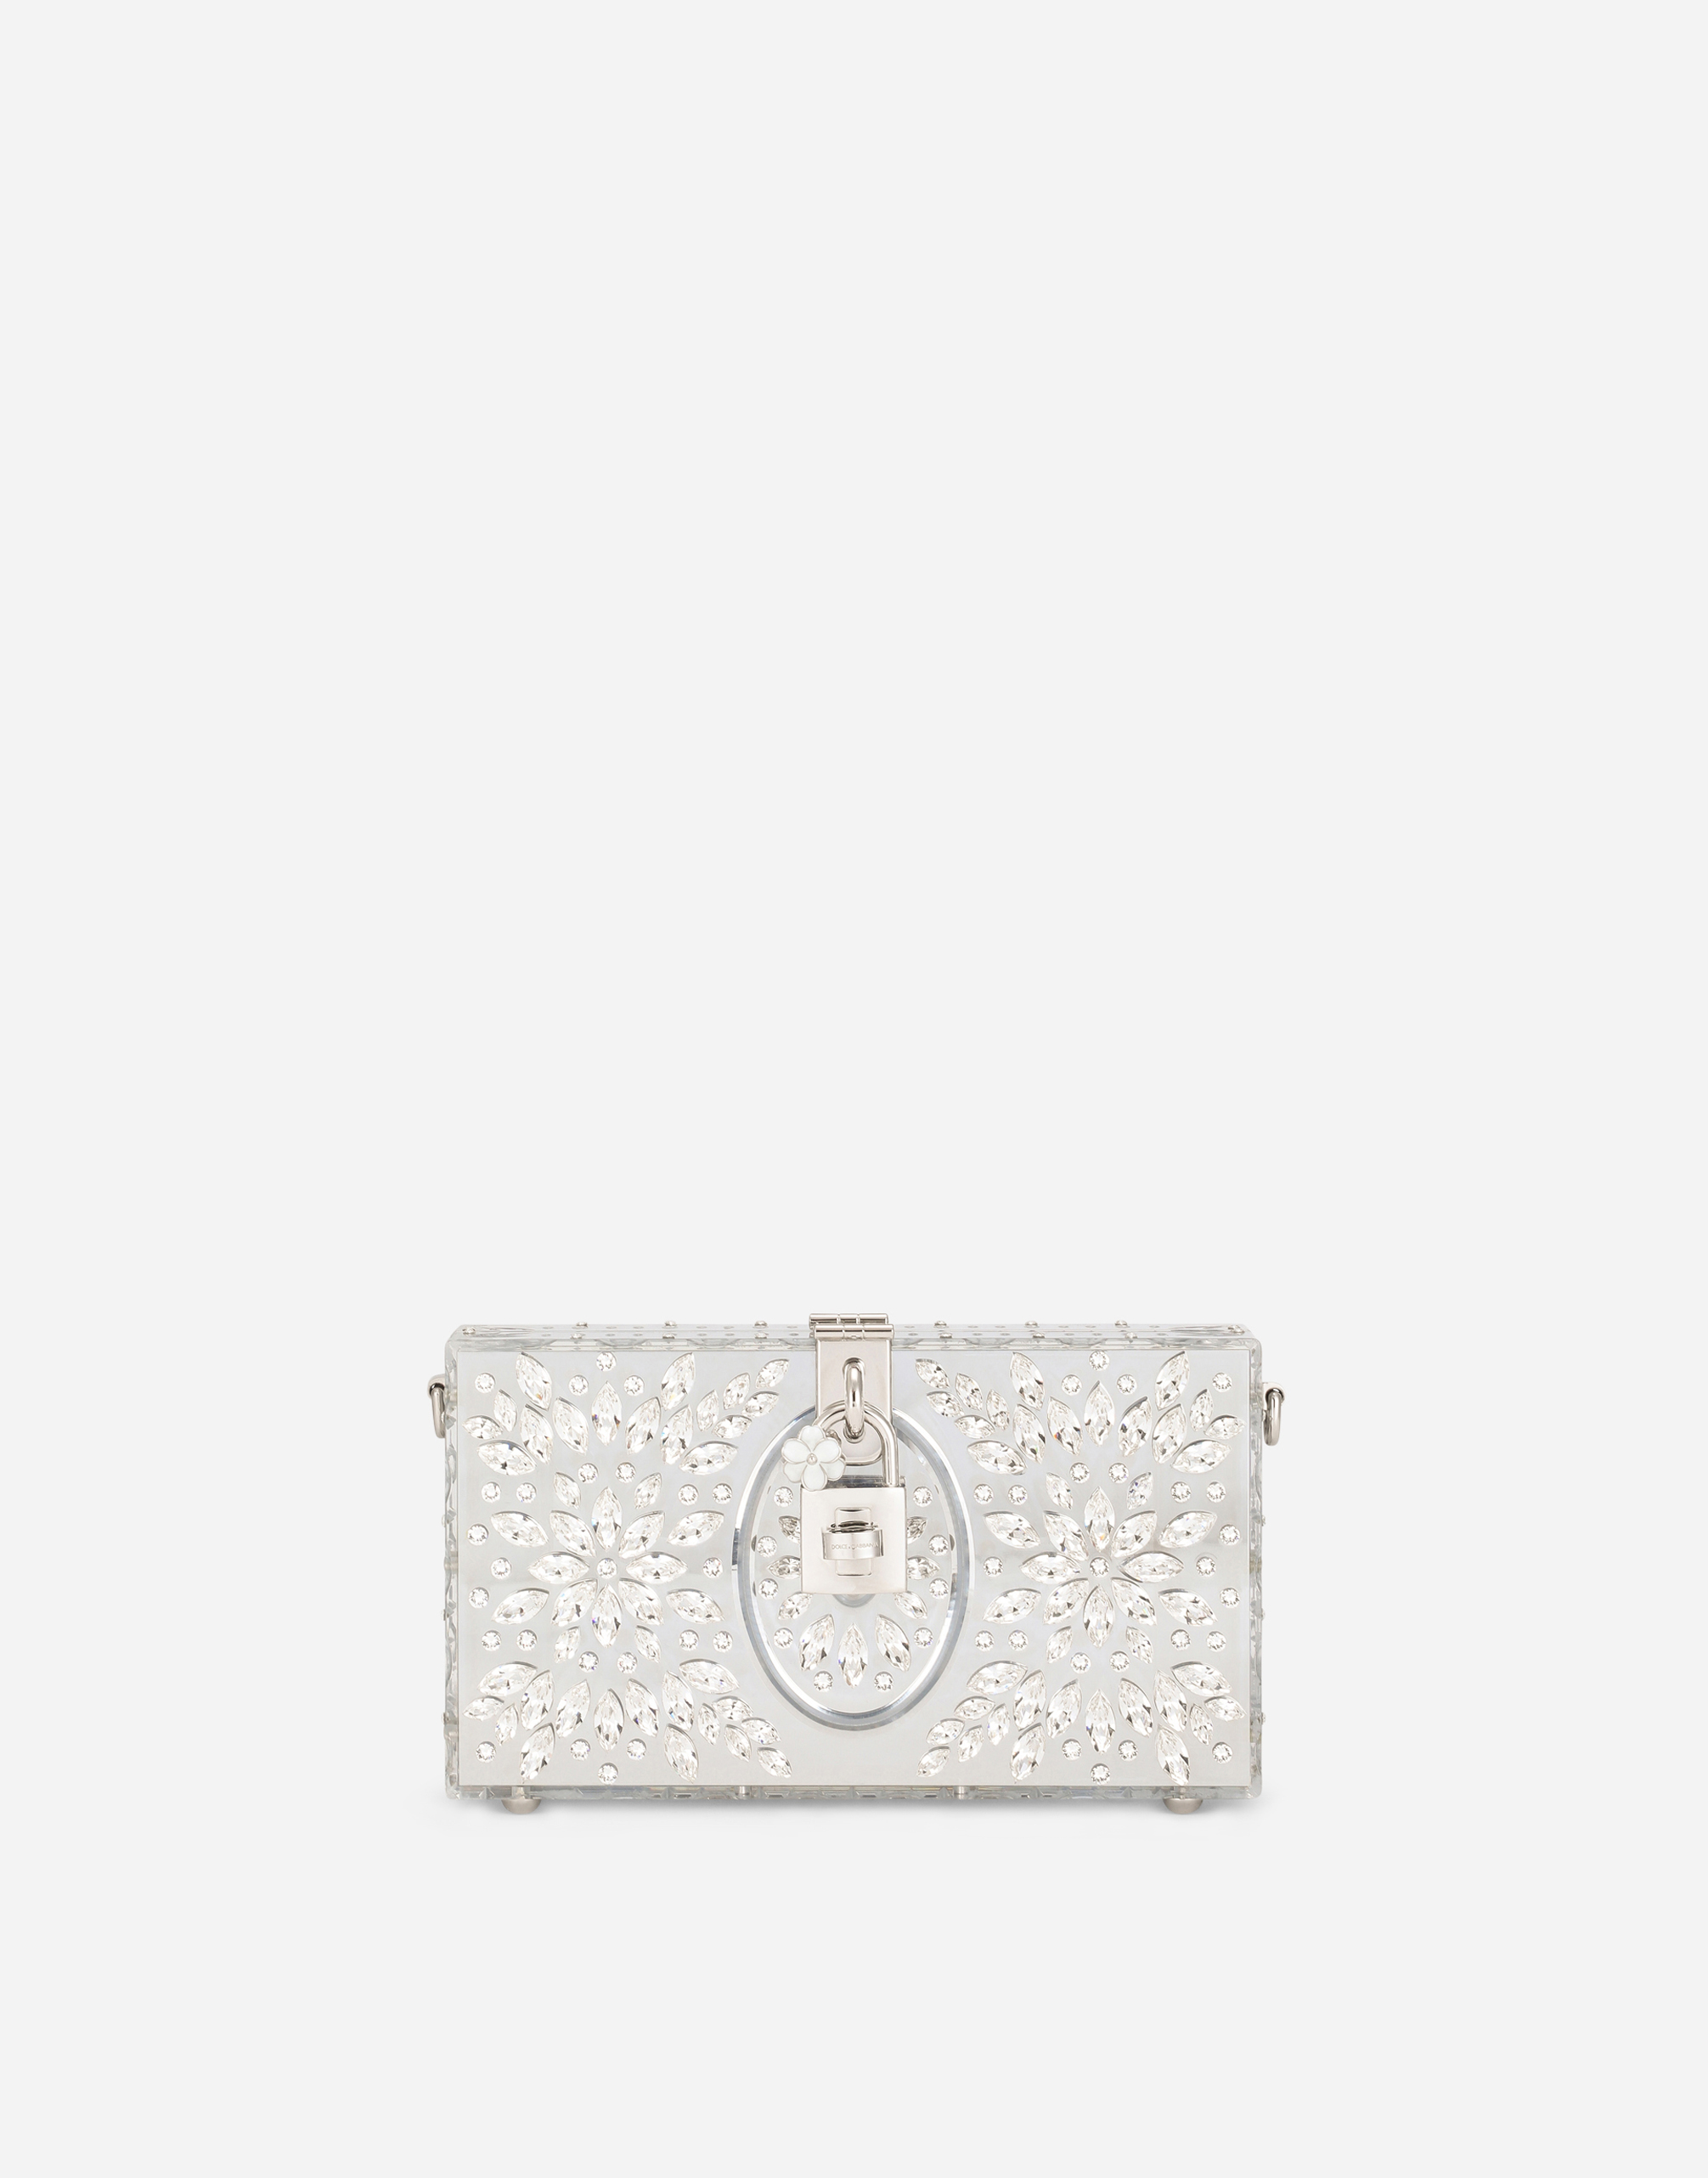 Acrylic glass and lace Dolce Box clutch in Silver